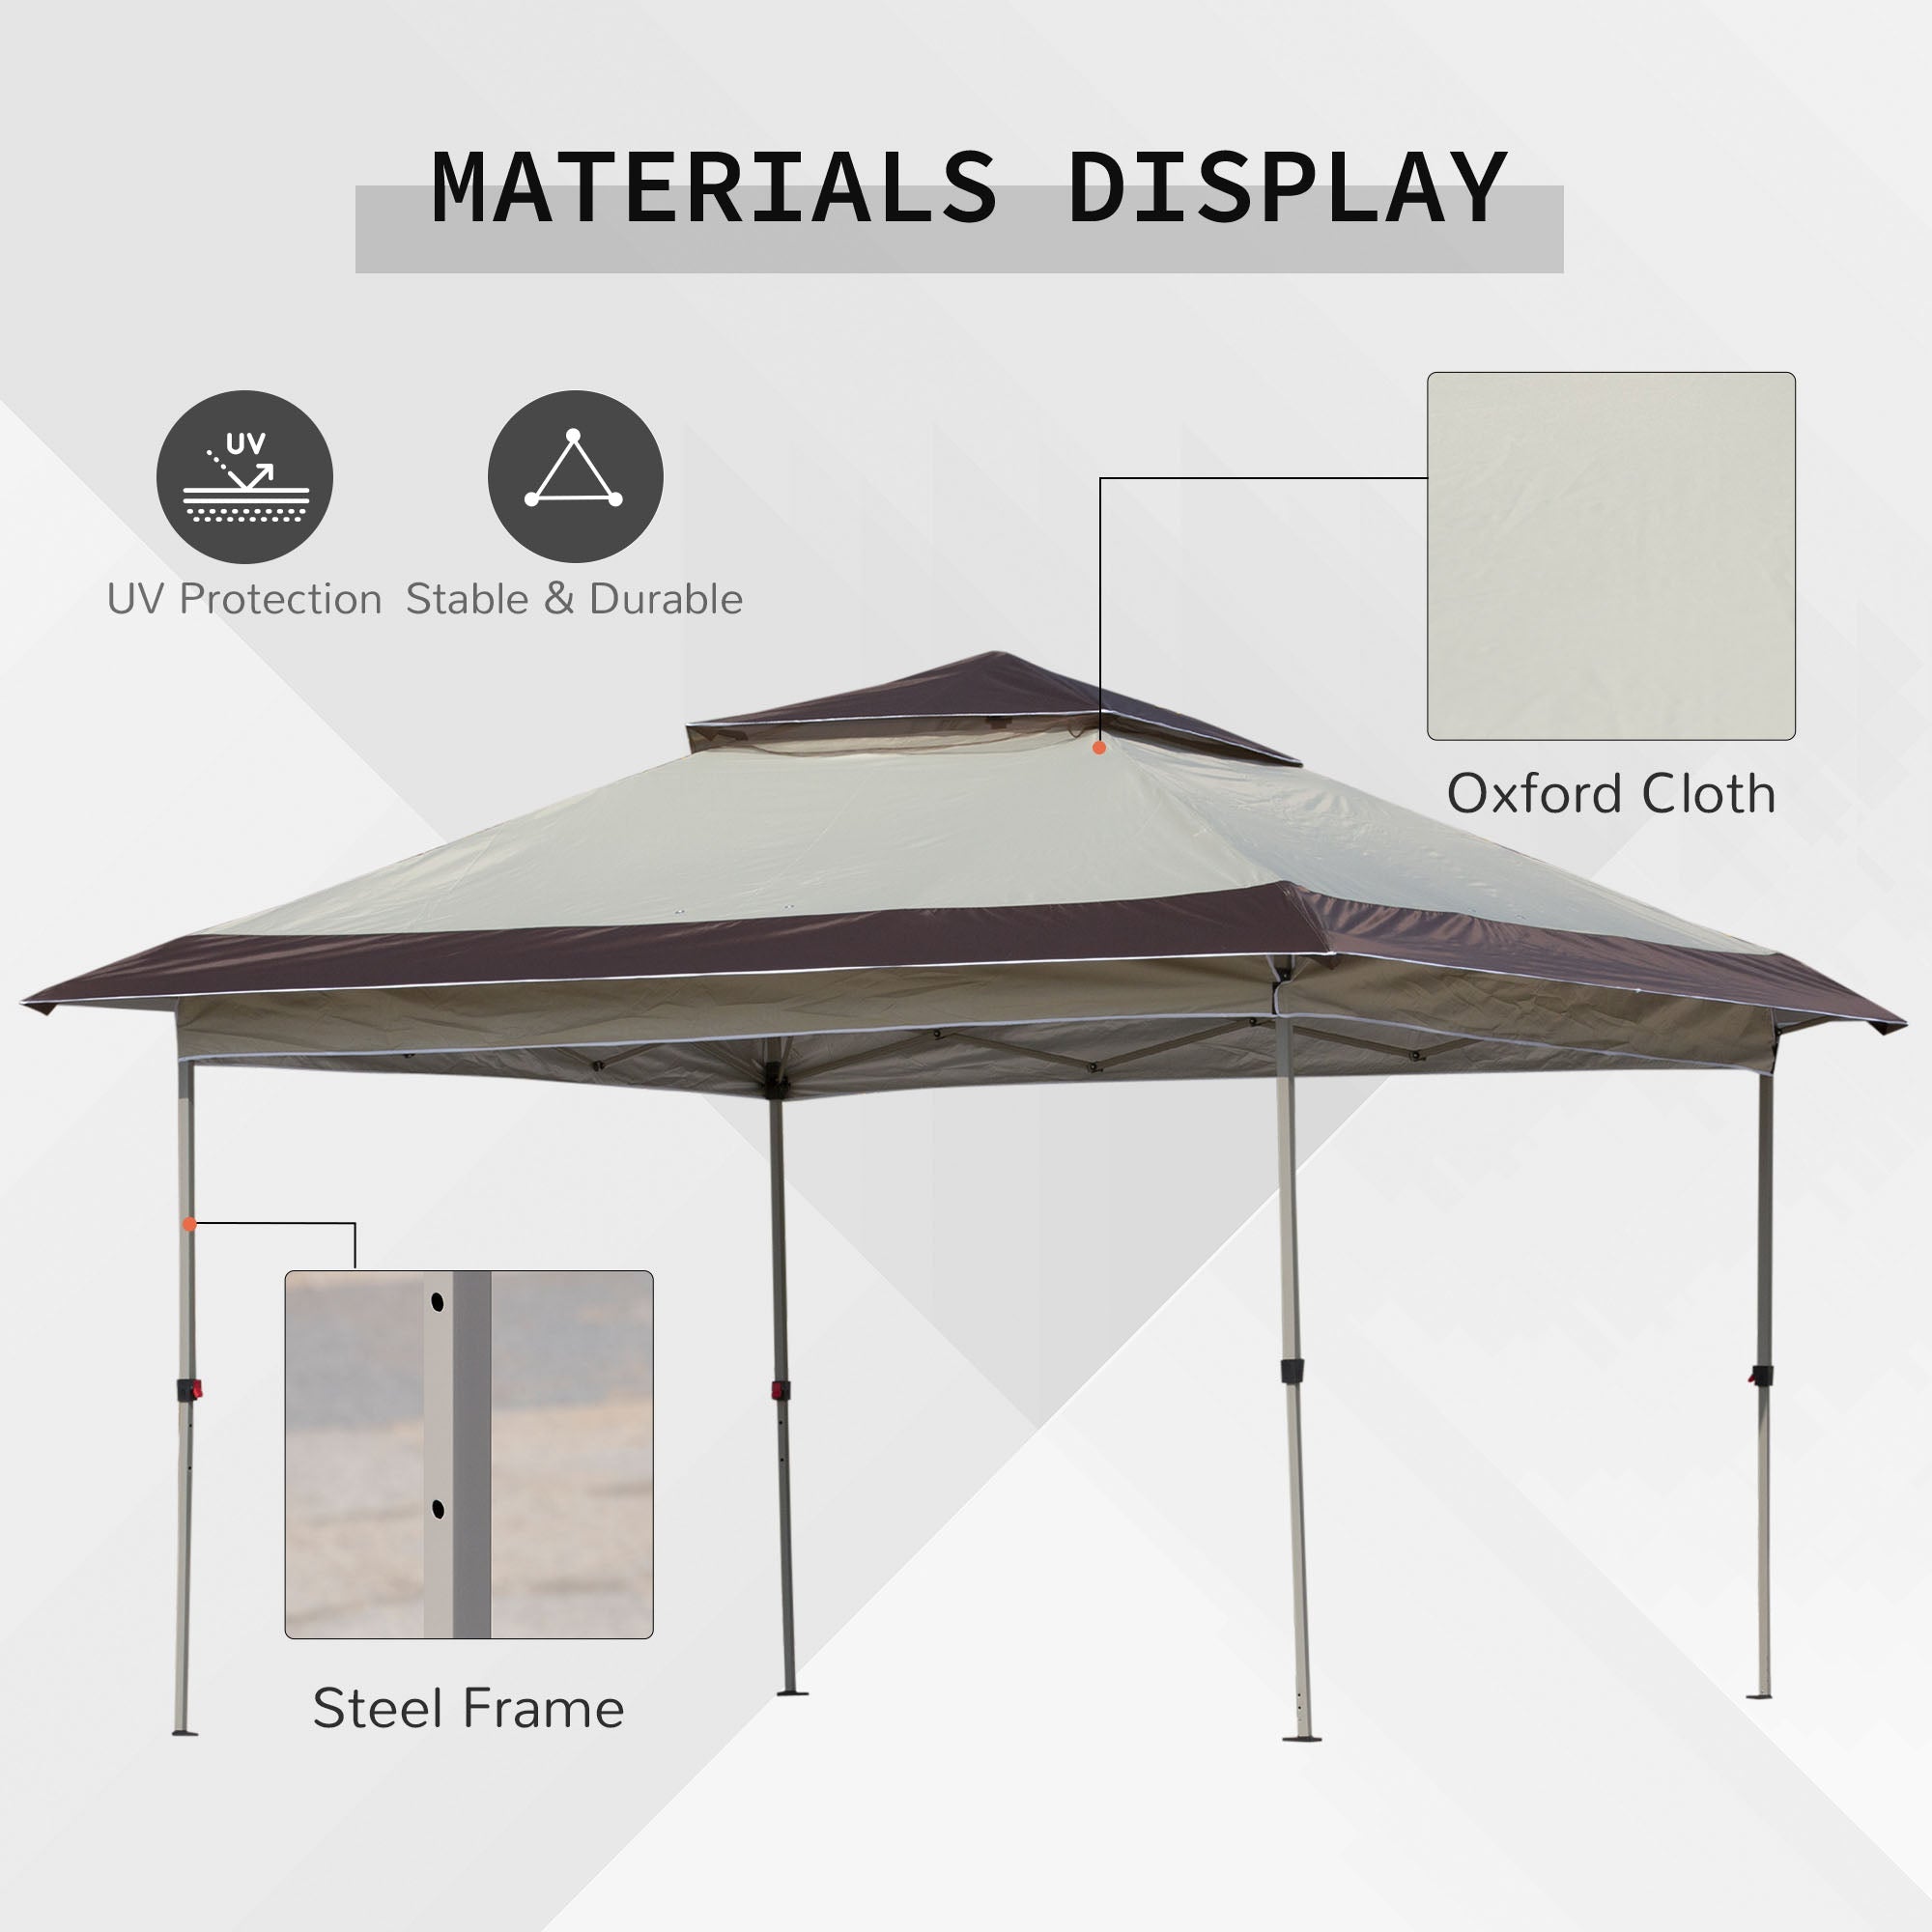 Outsunny 12' x 12' Pop Up Canopy Tent with Netting and Carry Bag, Instant Sun Shelter, Tents for Parties, Height Adjustable, for Outdoor, Garden, Patio, Beige